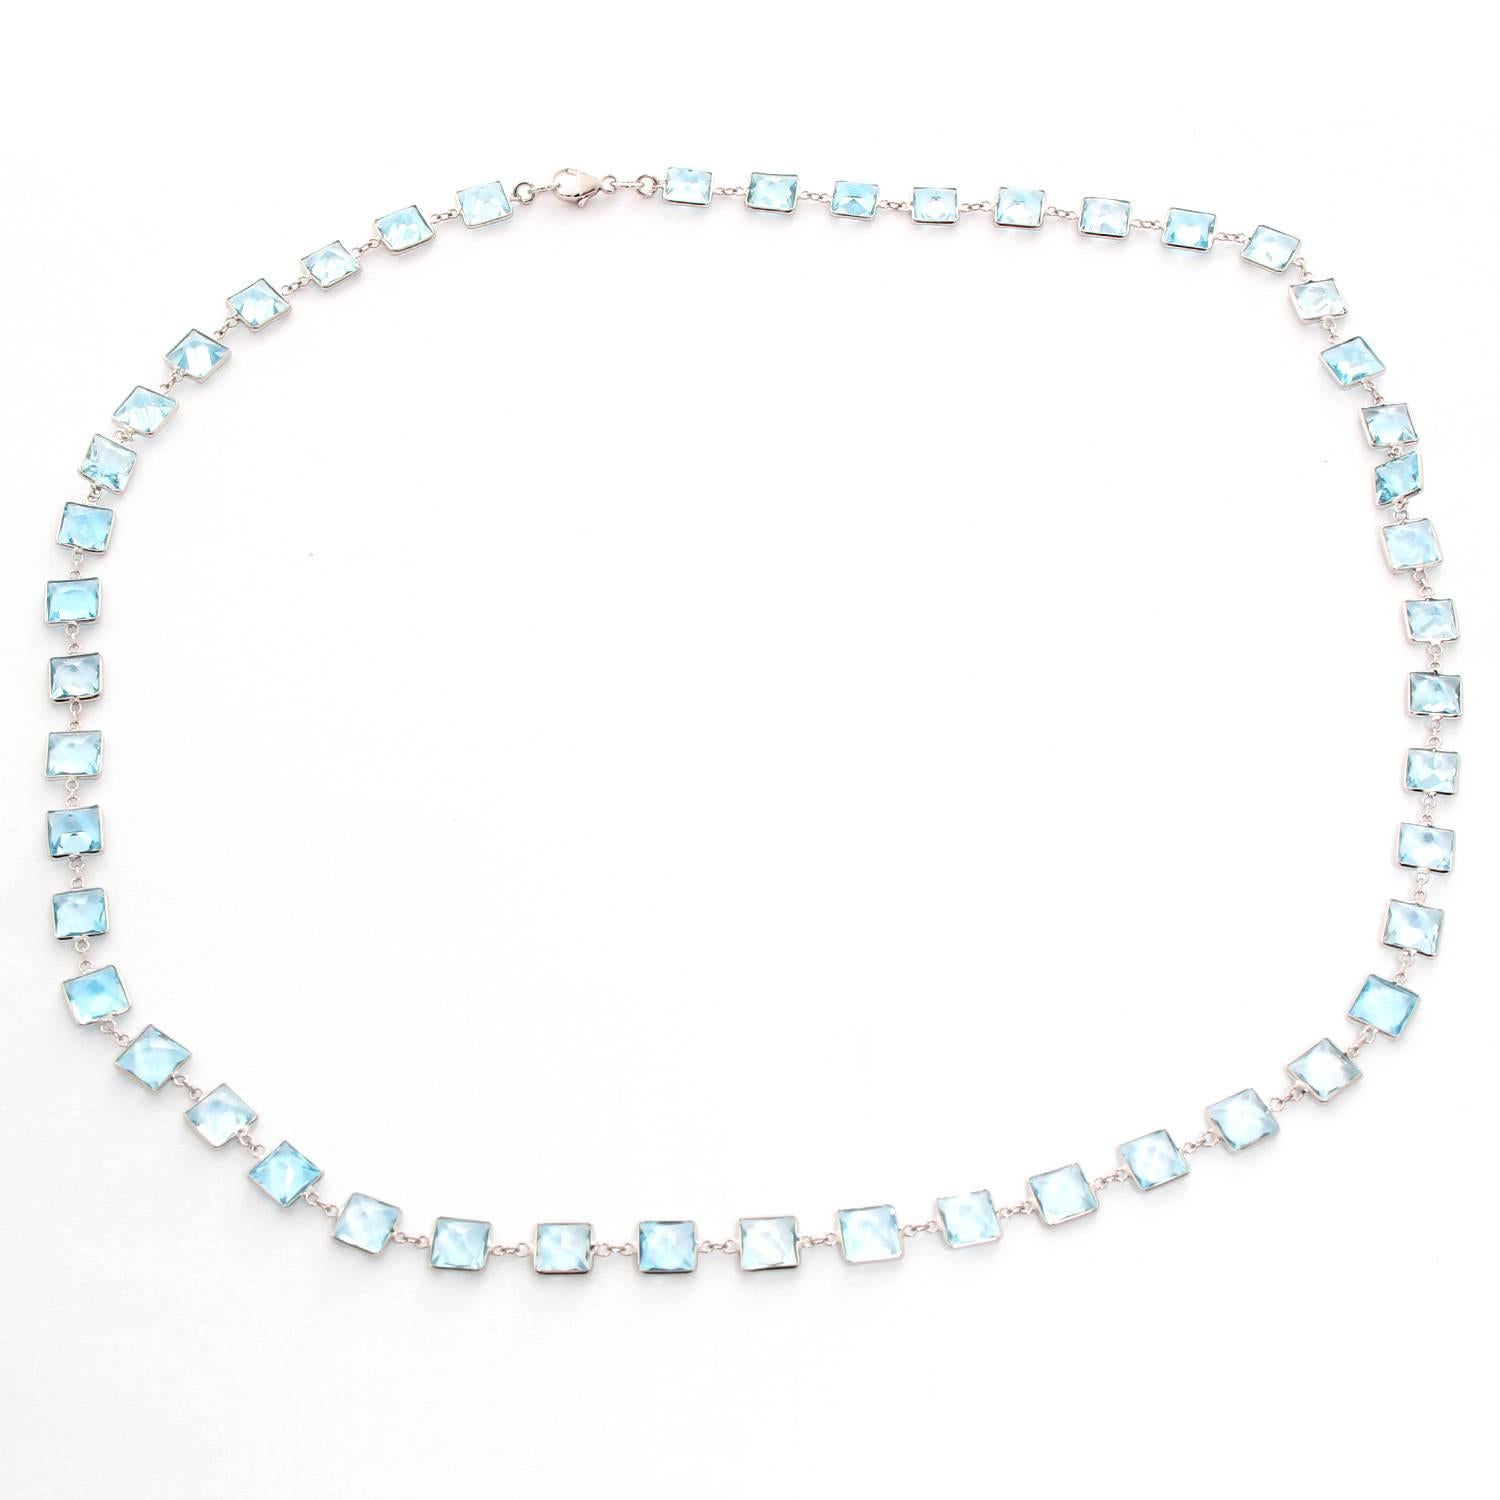 Stunning 14K White Gold Blue Topaz by the Yard Necklace - .  14K White Gold with Square Blue Topaz stones. Length 20 inches. Total weight 16.9 grams. Perfect to wear with an every day outfit or a night outfit.